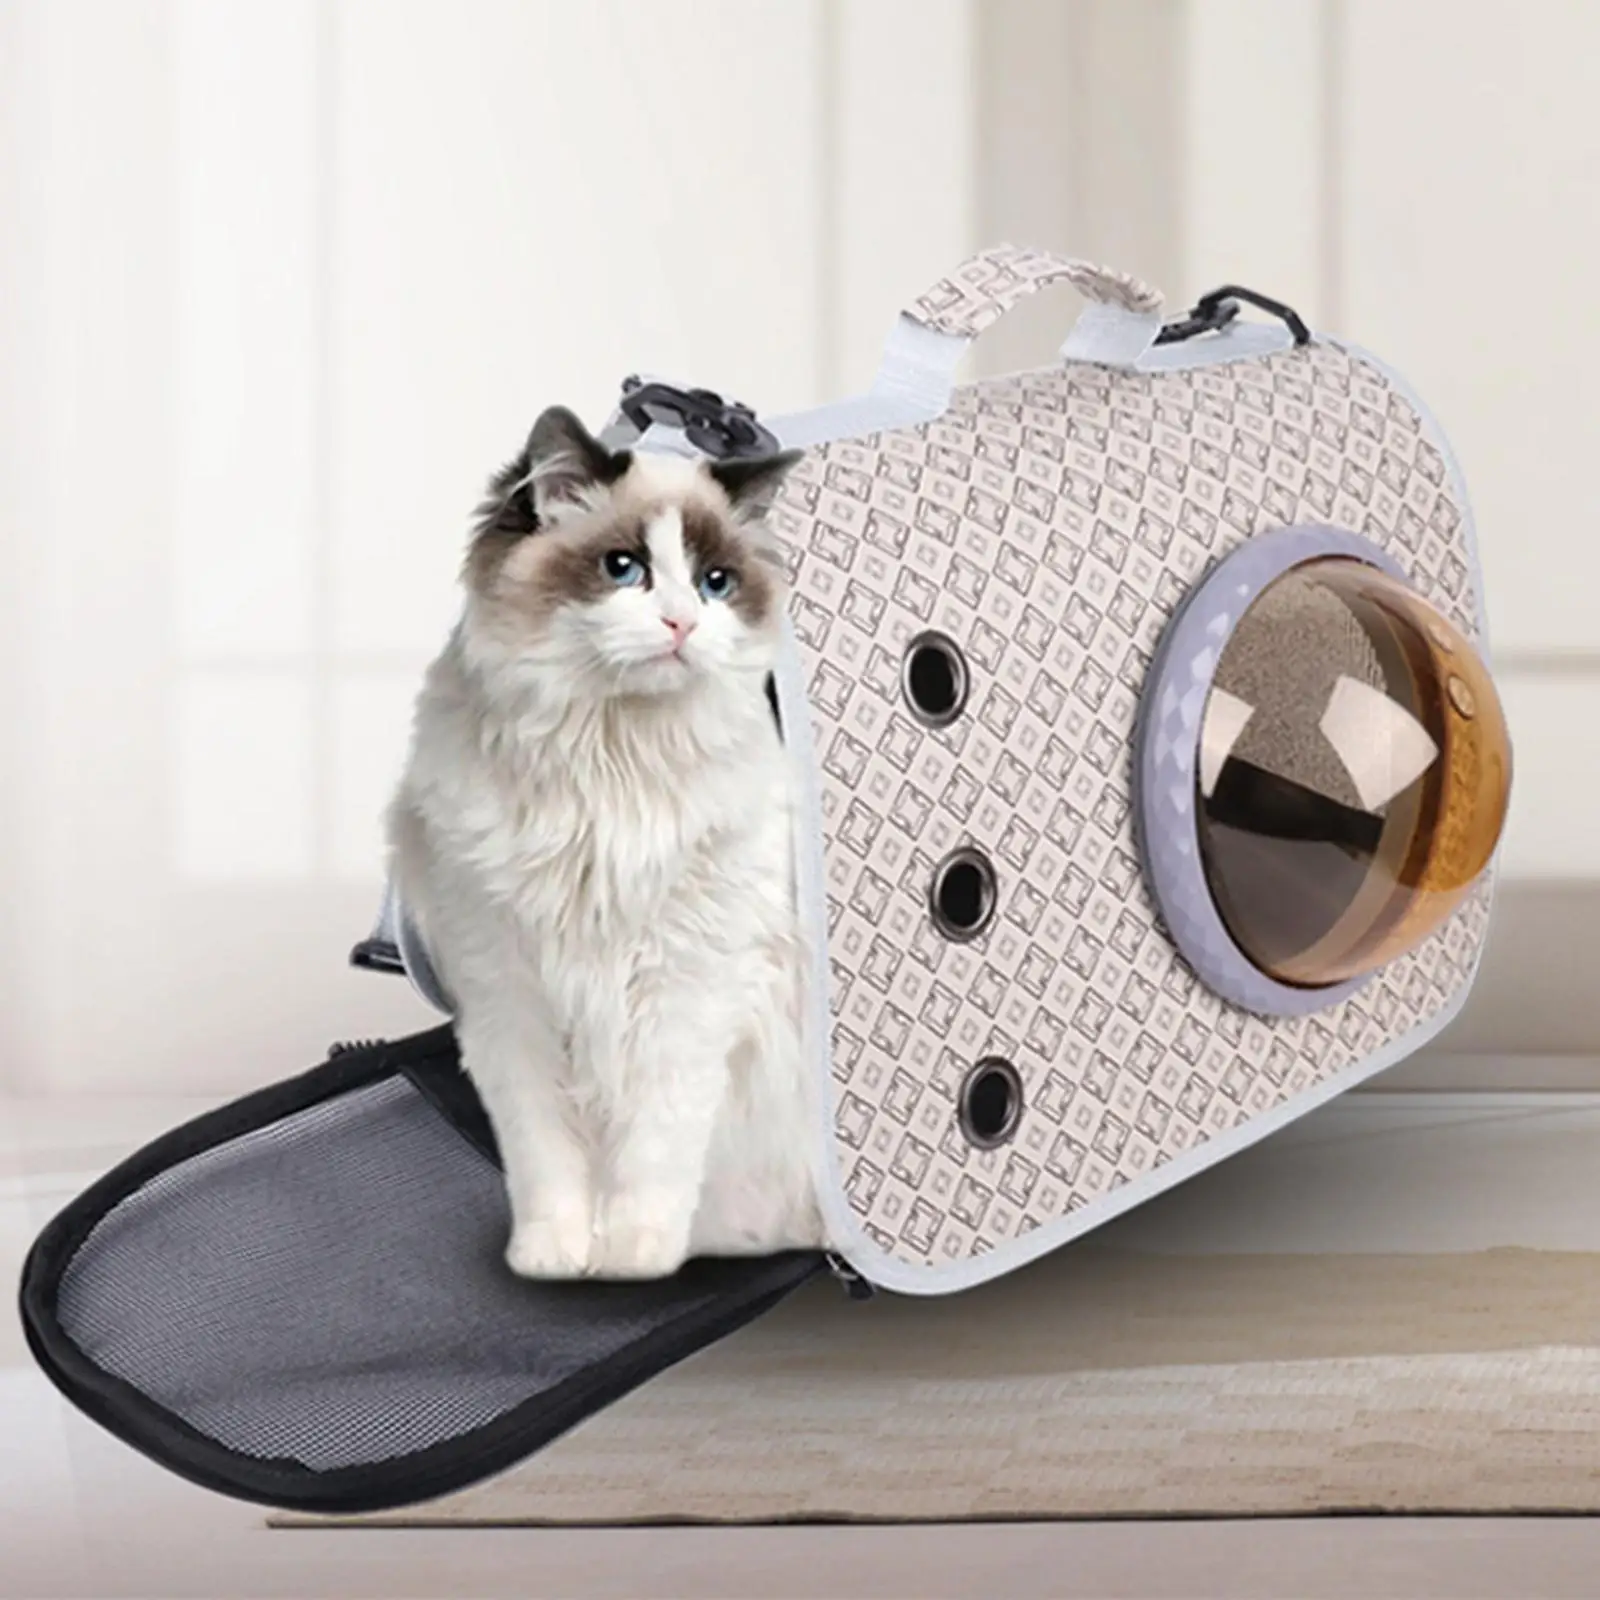 Foldable Pets Carrier Breathable Cats Carriers Oxford Cloth Soft Sided Carriers for Medium Cats Dogs Travel Pets Within 11lb